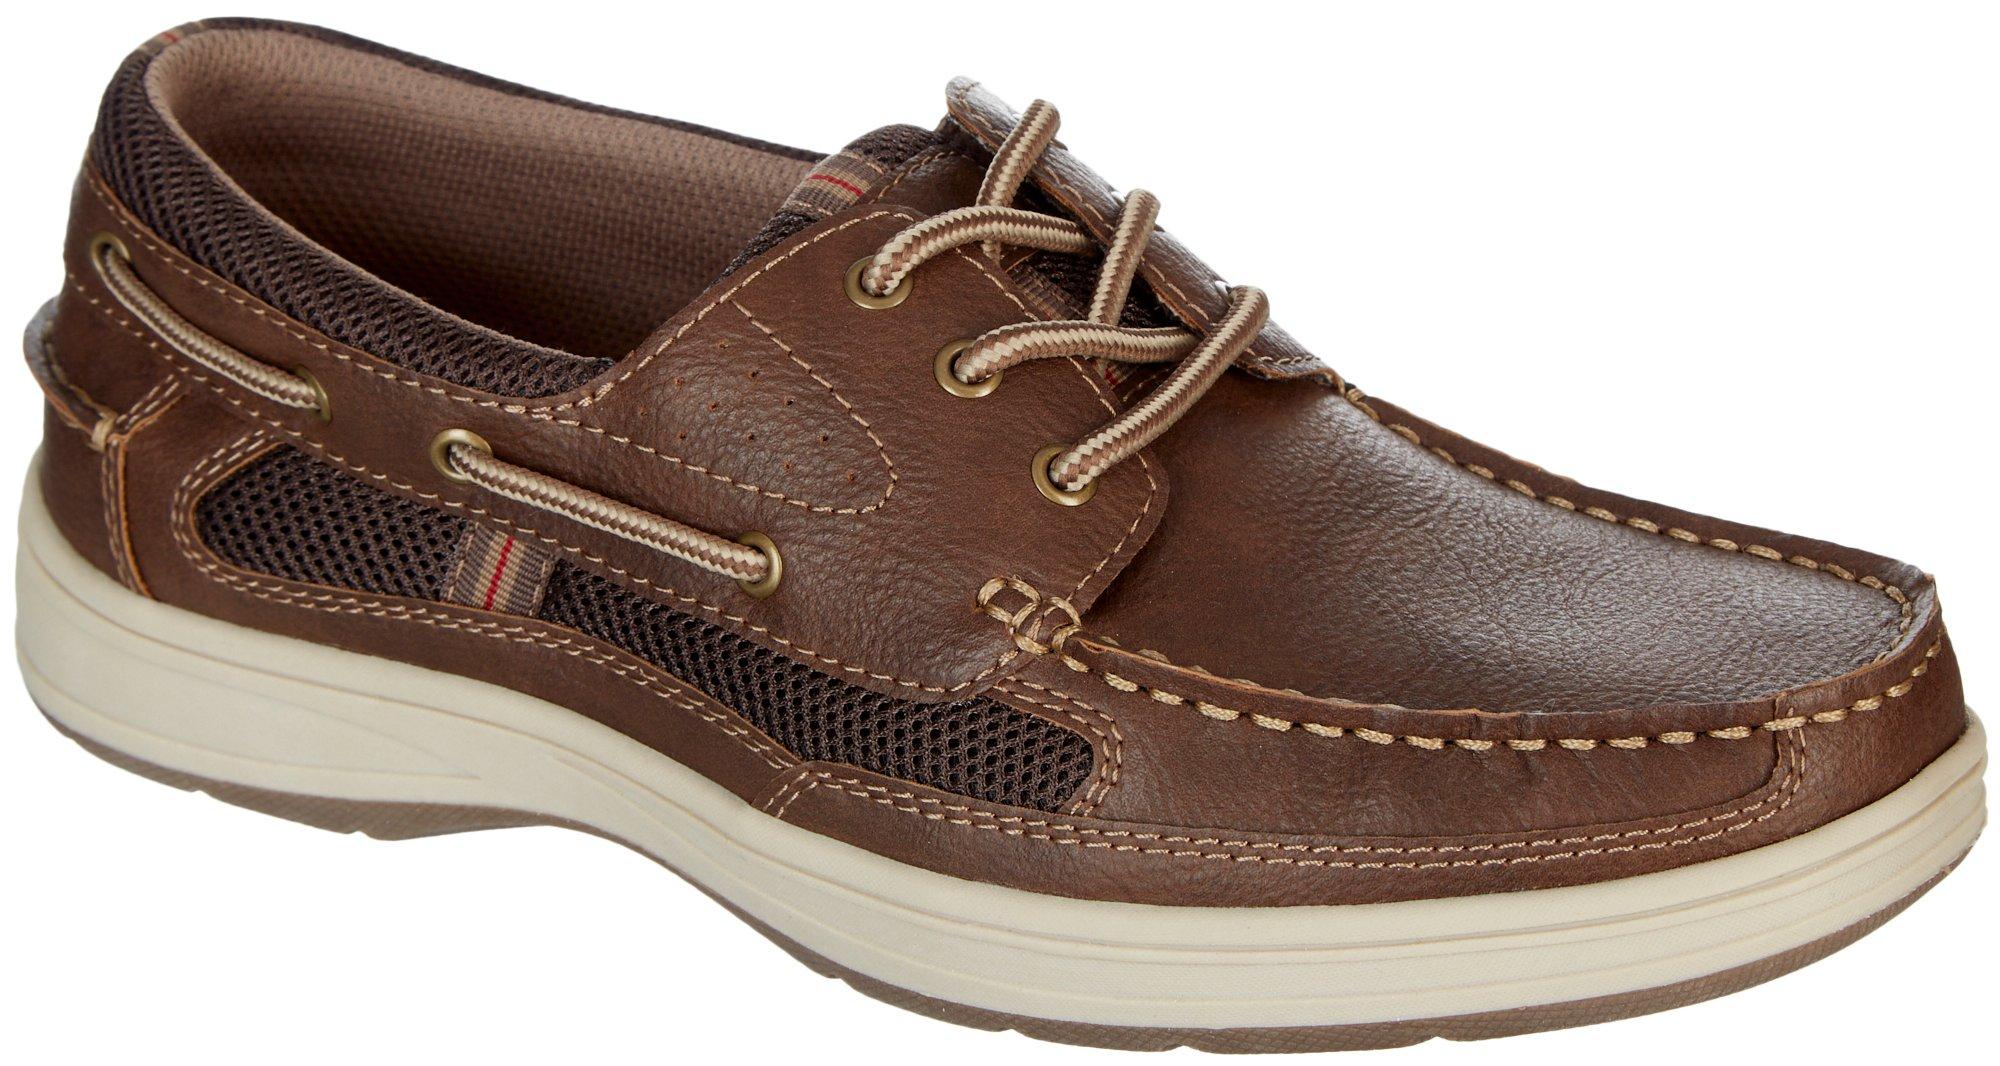 Reel Legends Mens Outrigger Casual Boat Shoes